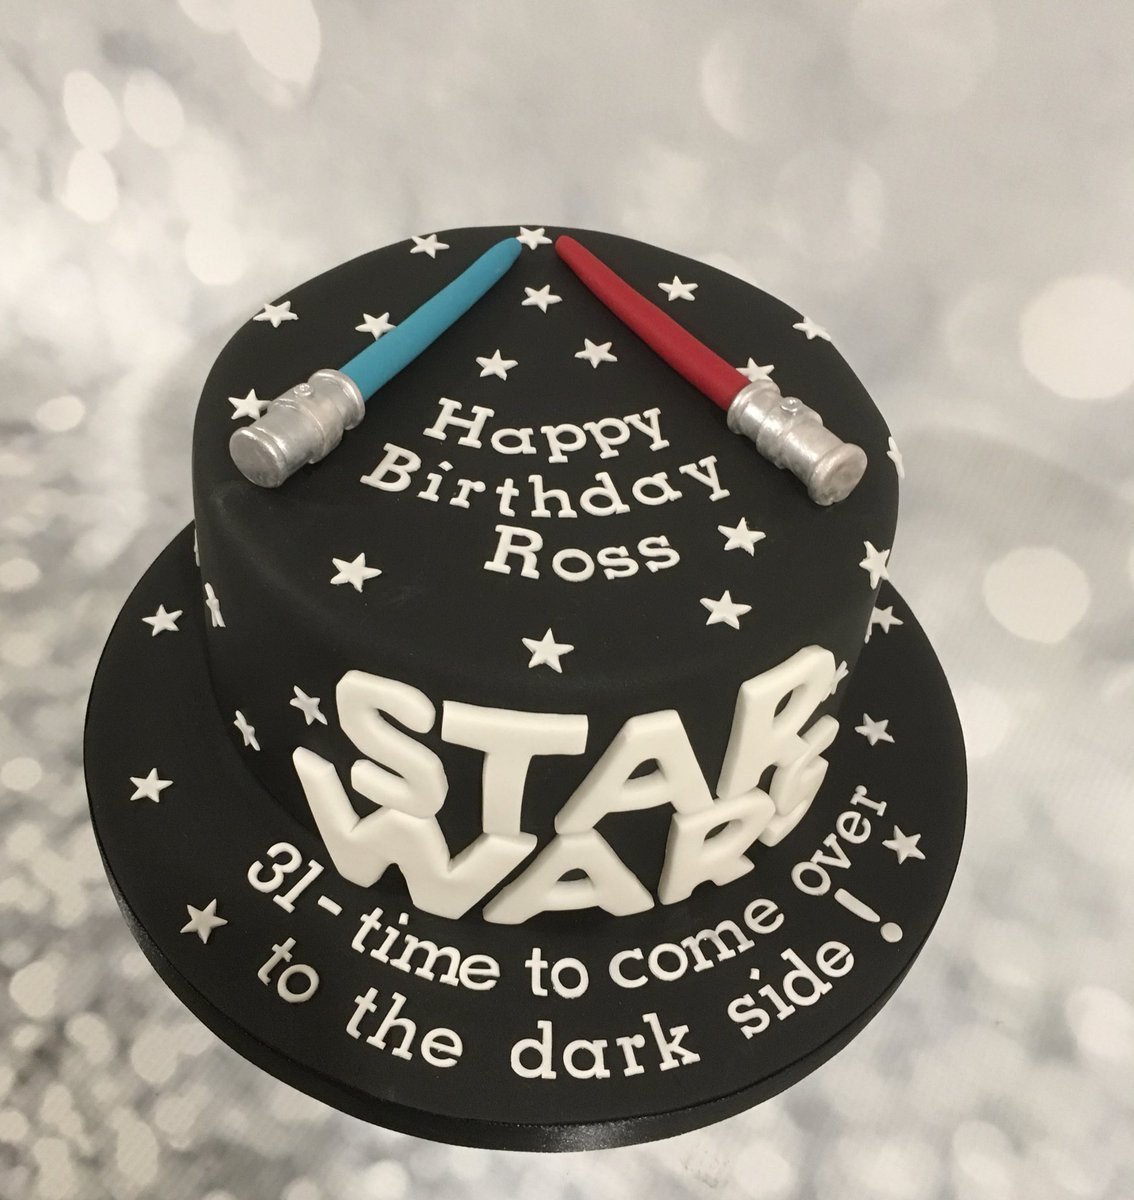 #StarWarsCake.  May the force be with you - have a great weekend!  cakesbycathie.co.uk